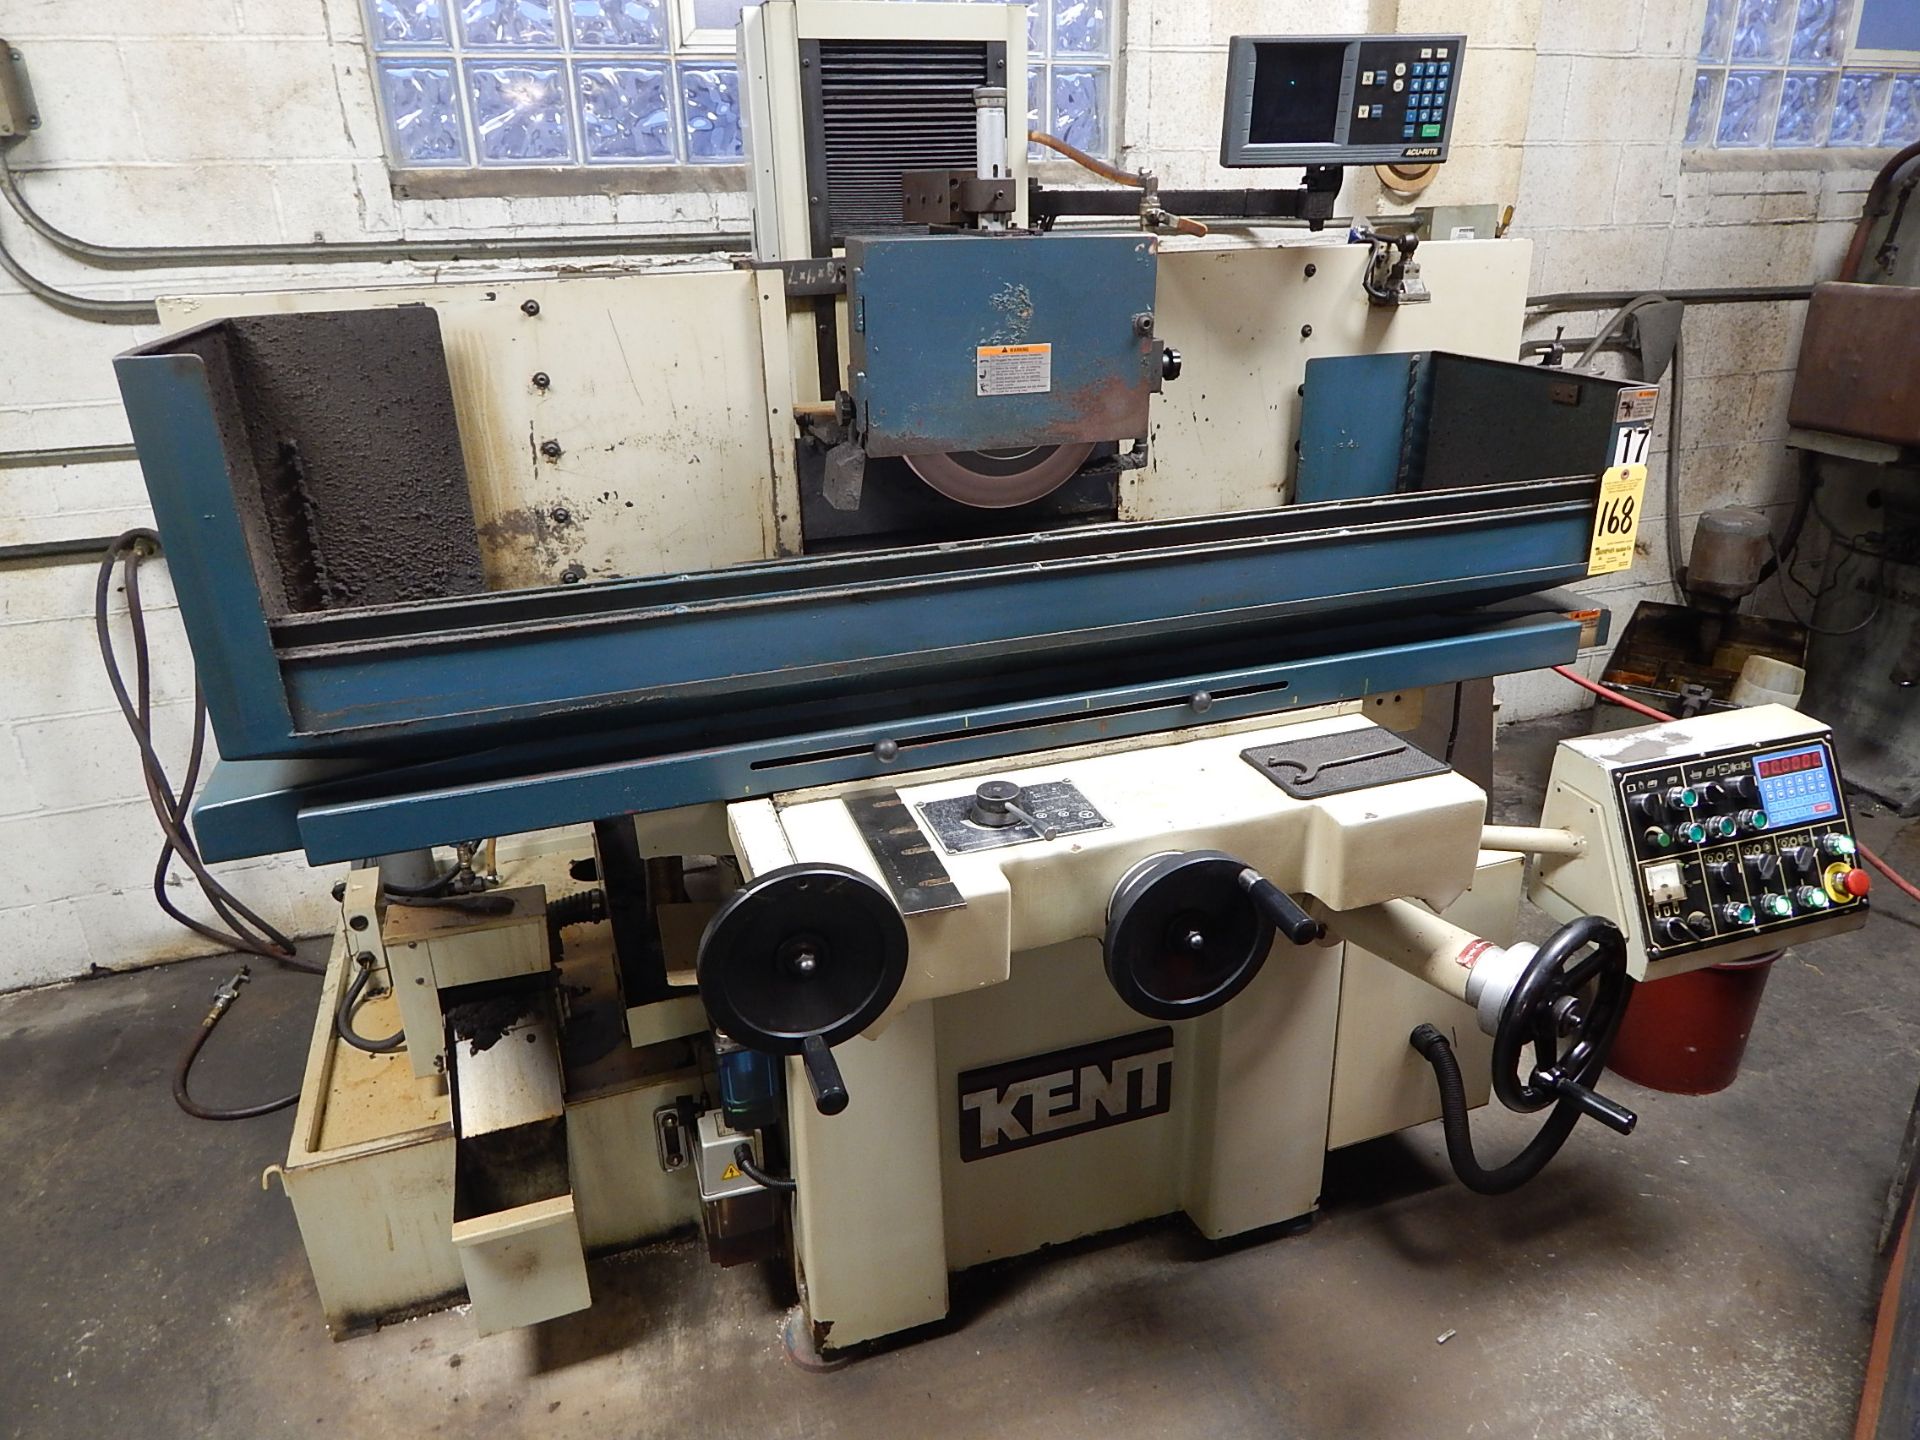 Kent Model KGS-63SD, 2-Axis Hydraulic Surface Grinder, s/n 97066403, New in 1997, 12 In. X 24 In. - Image 3 of 11